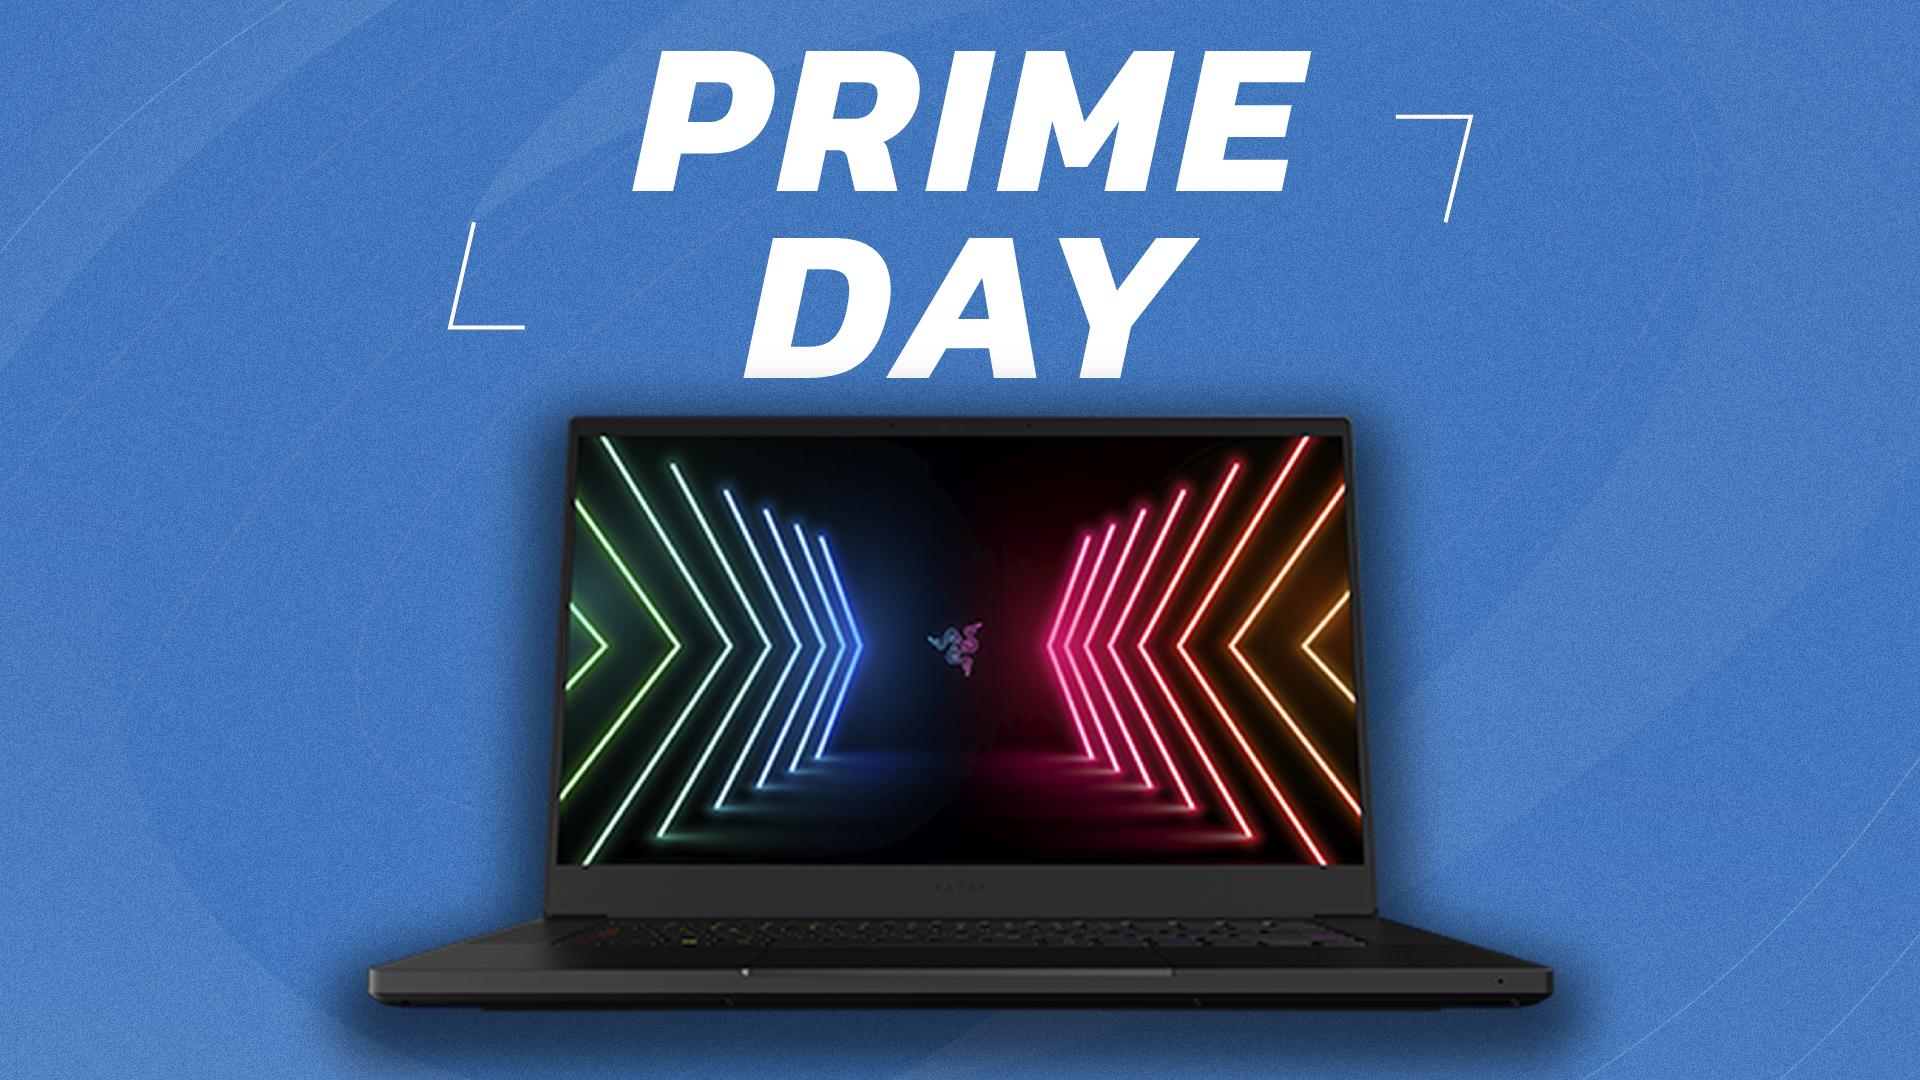 Razer Blade 15 on blue Prime Day background with prime day lettering